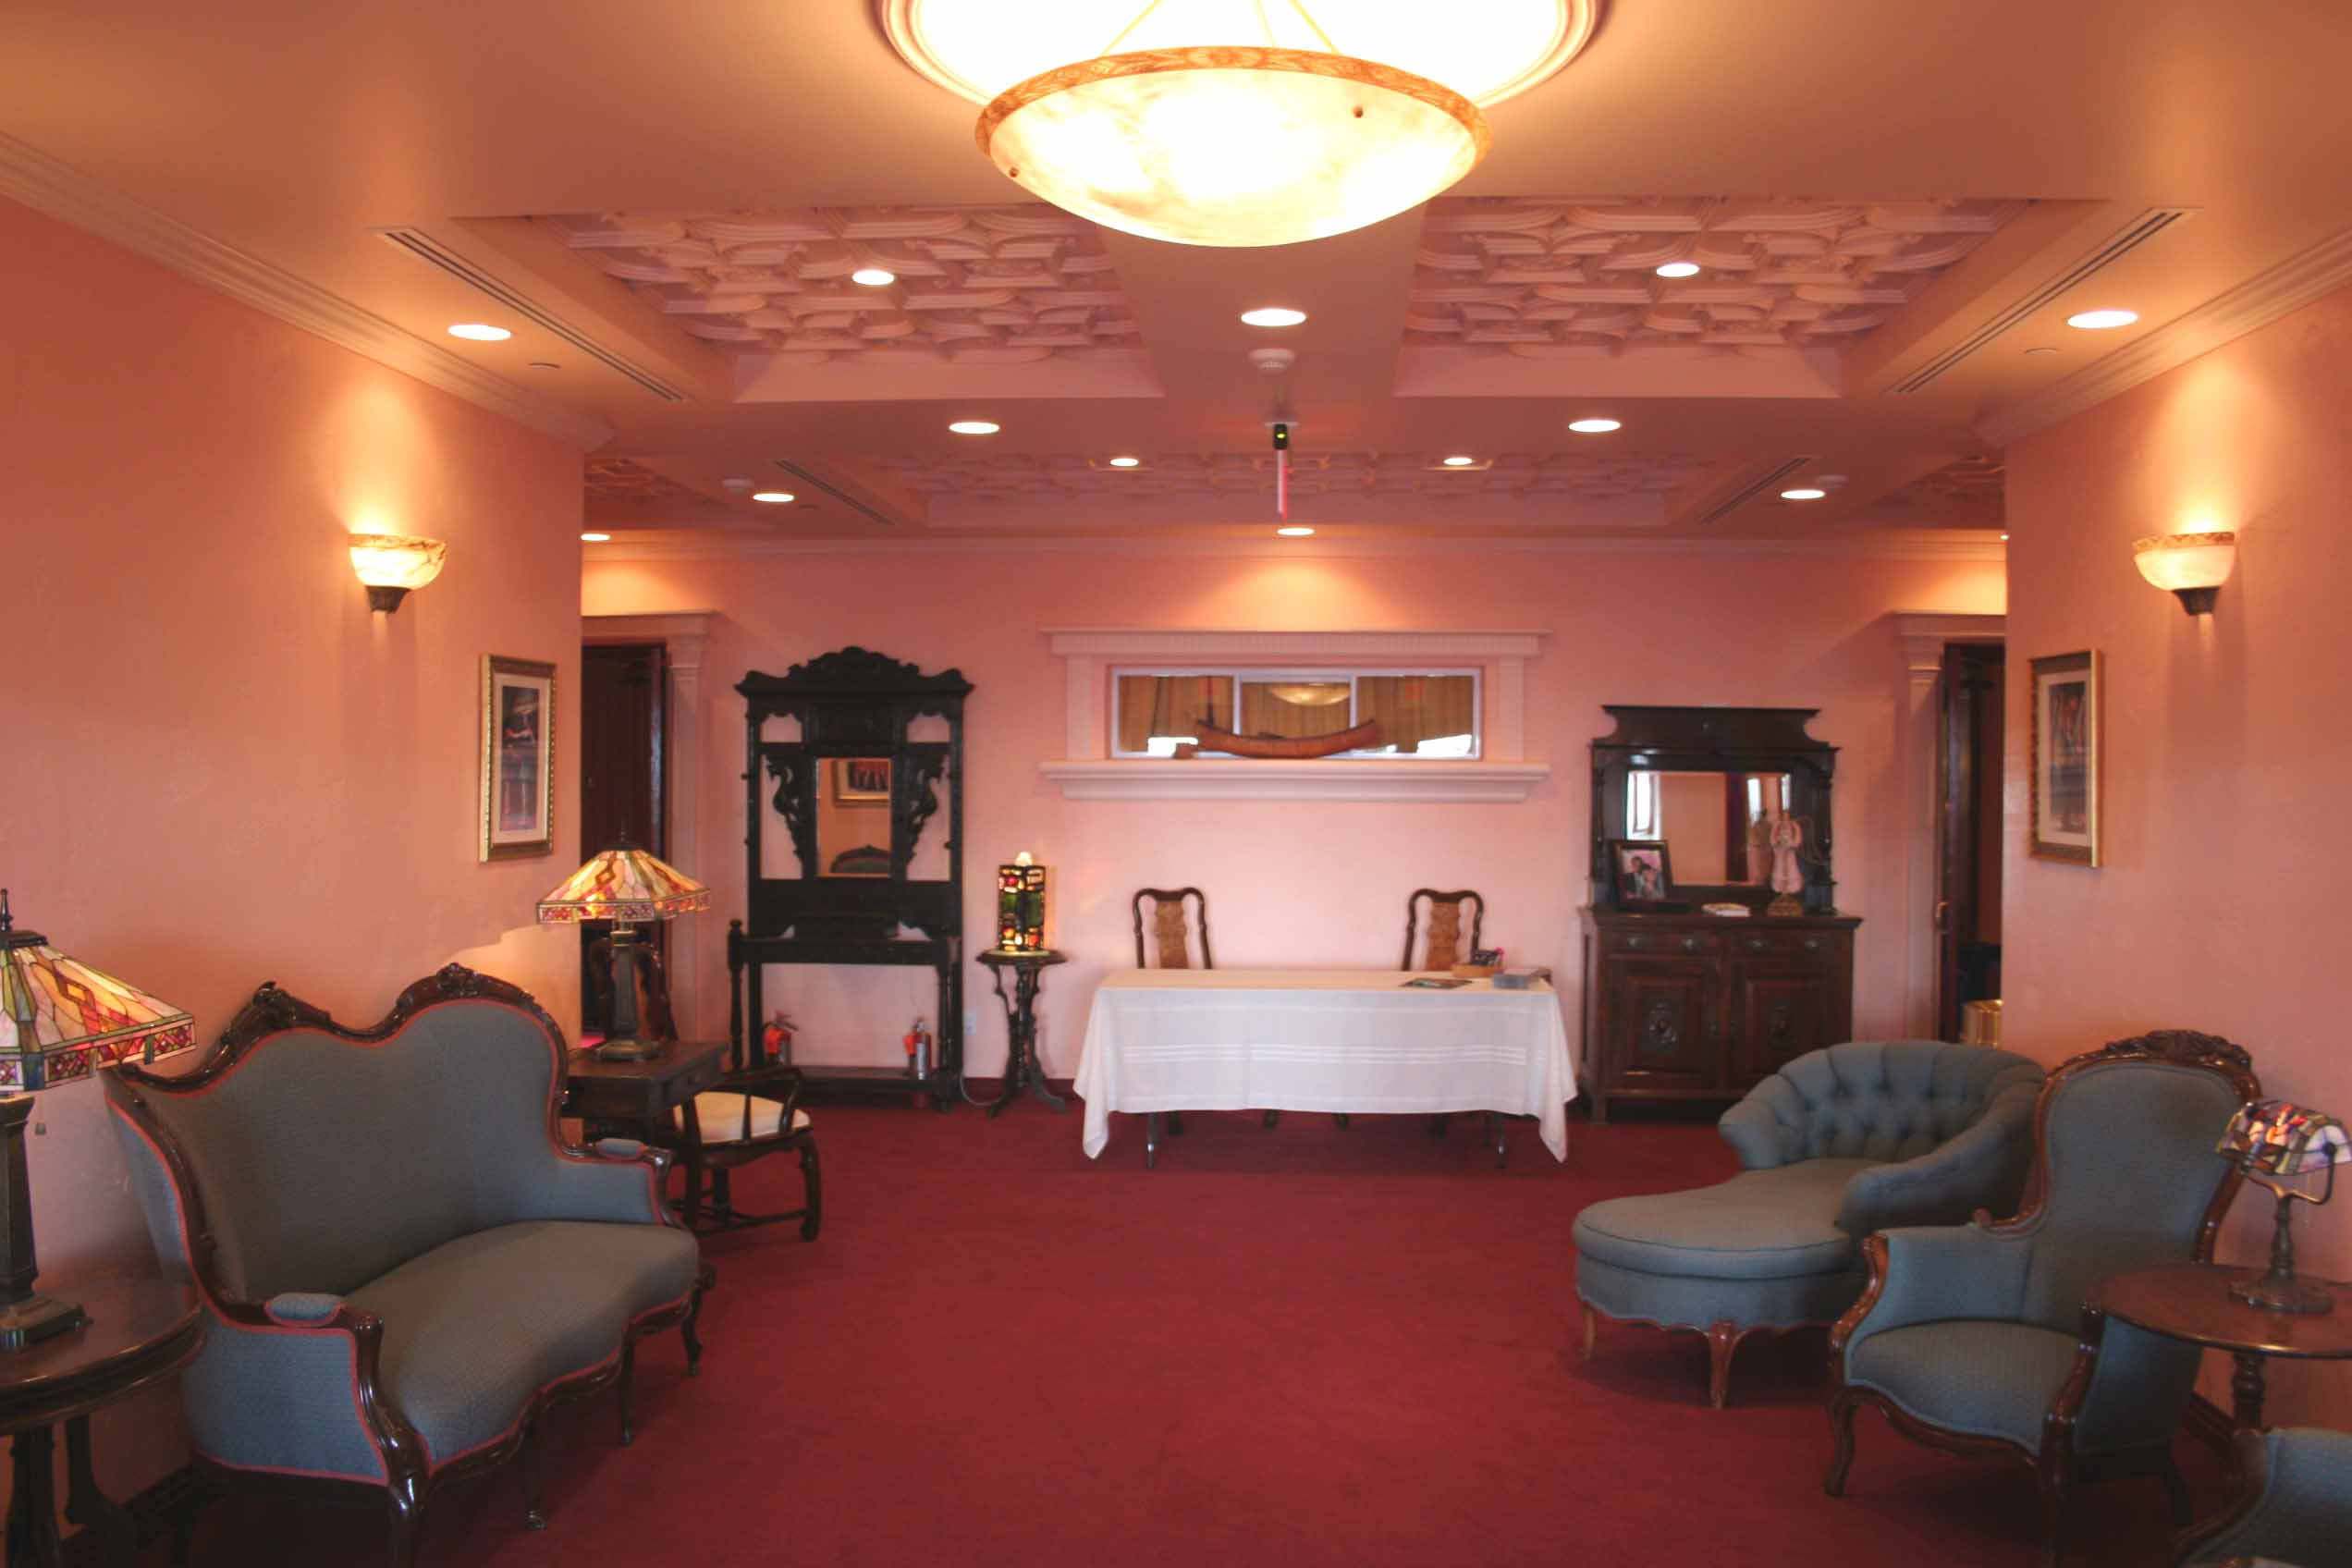 Lobby of the Boulder Theatre.